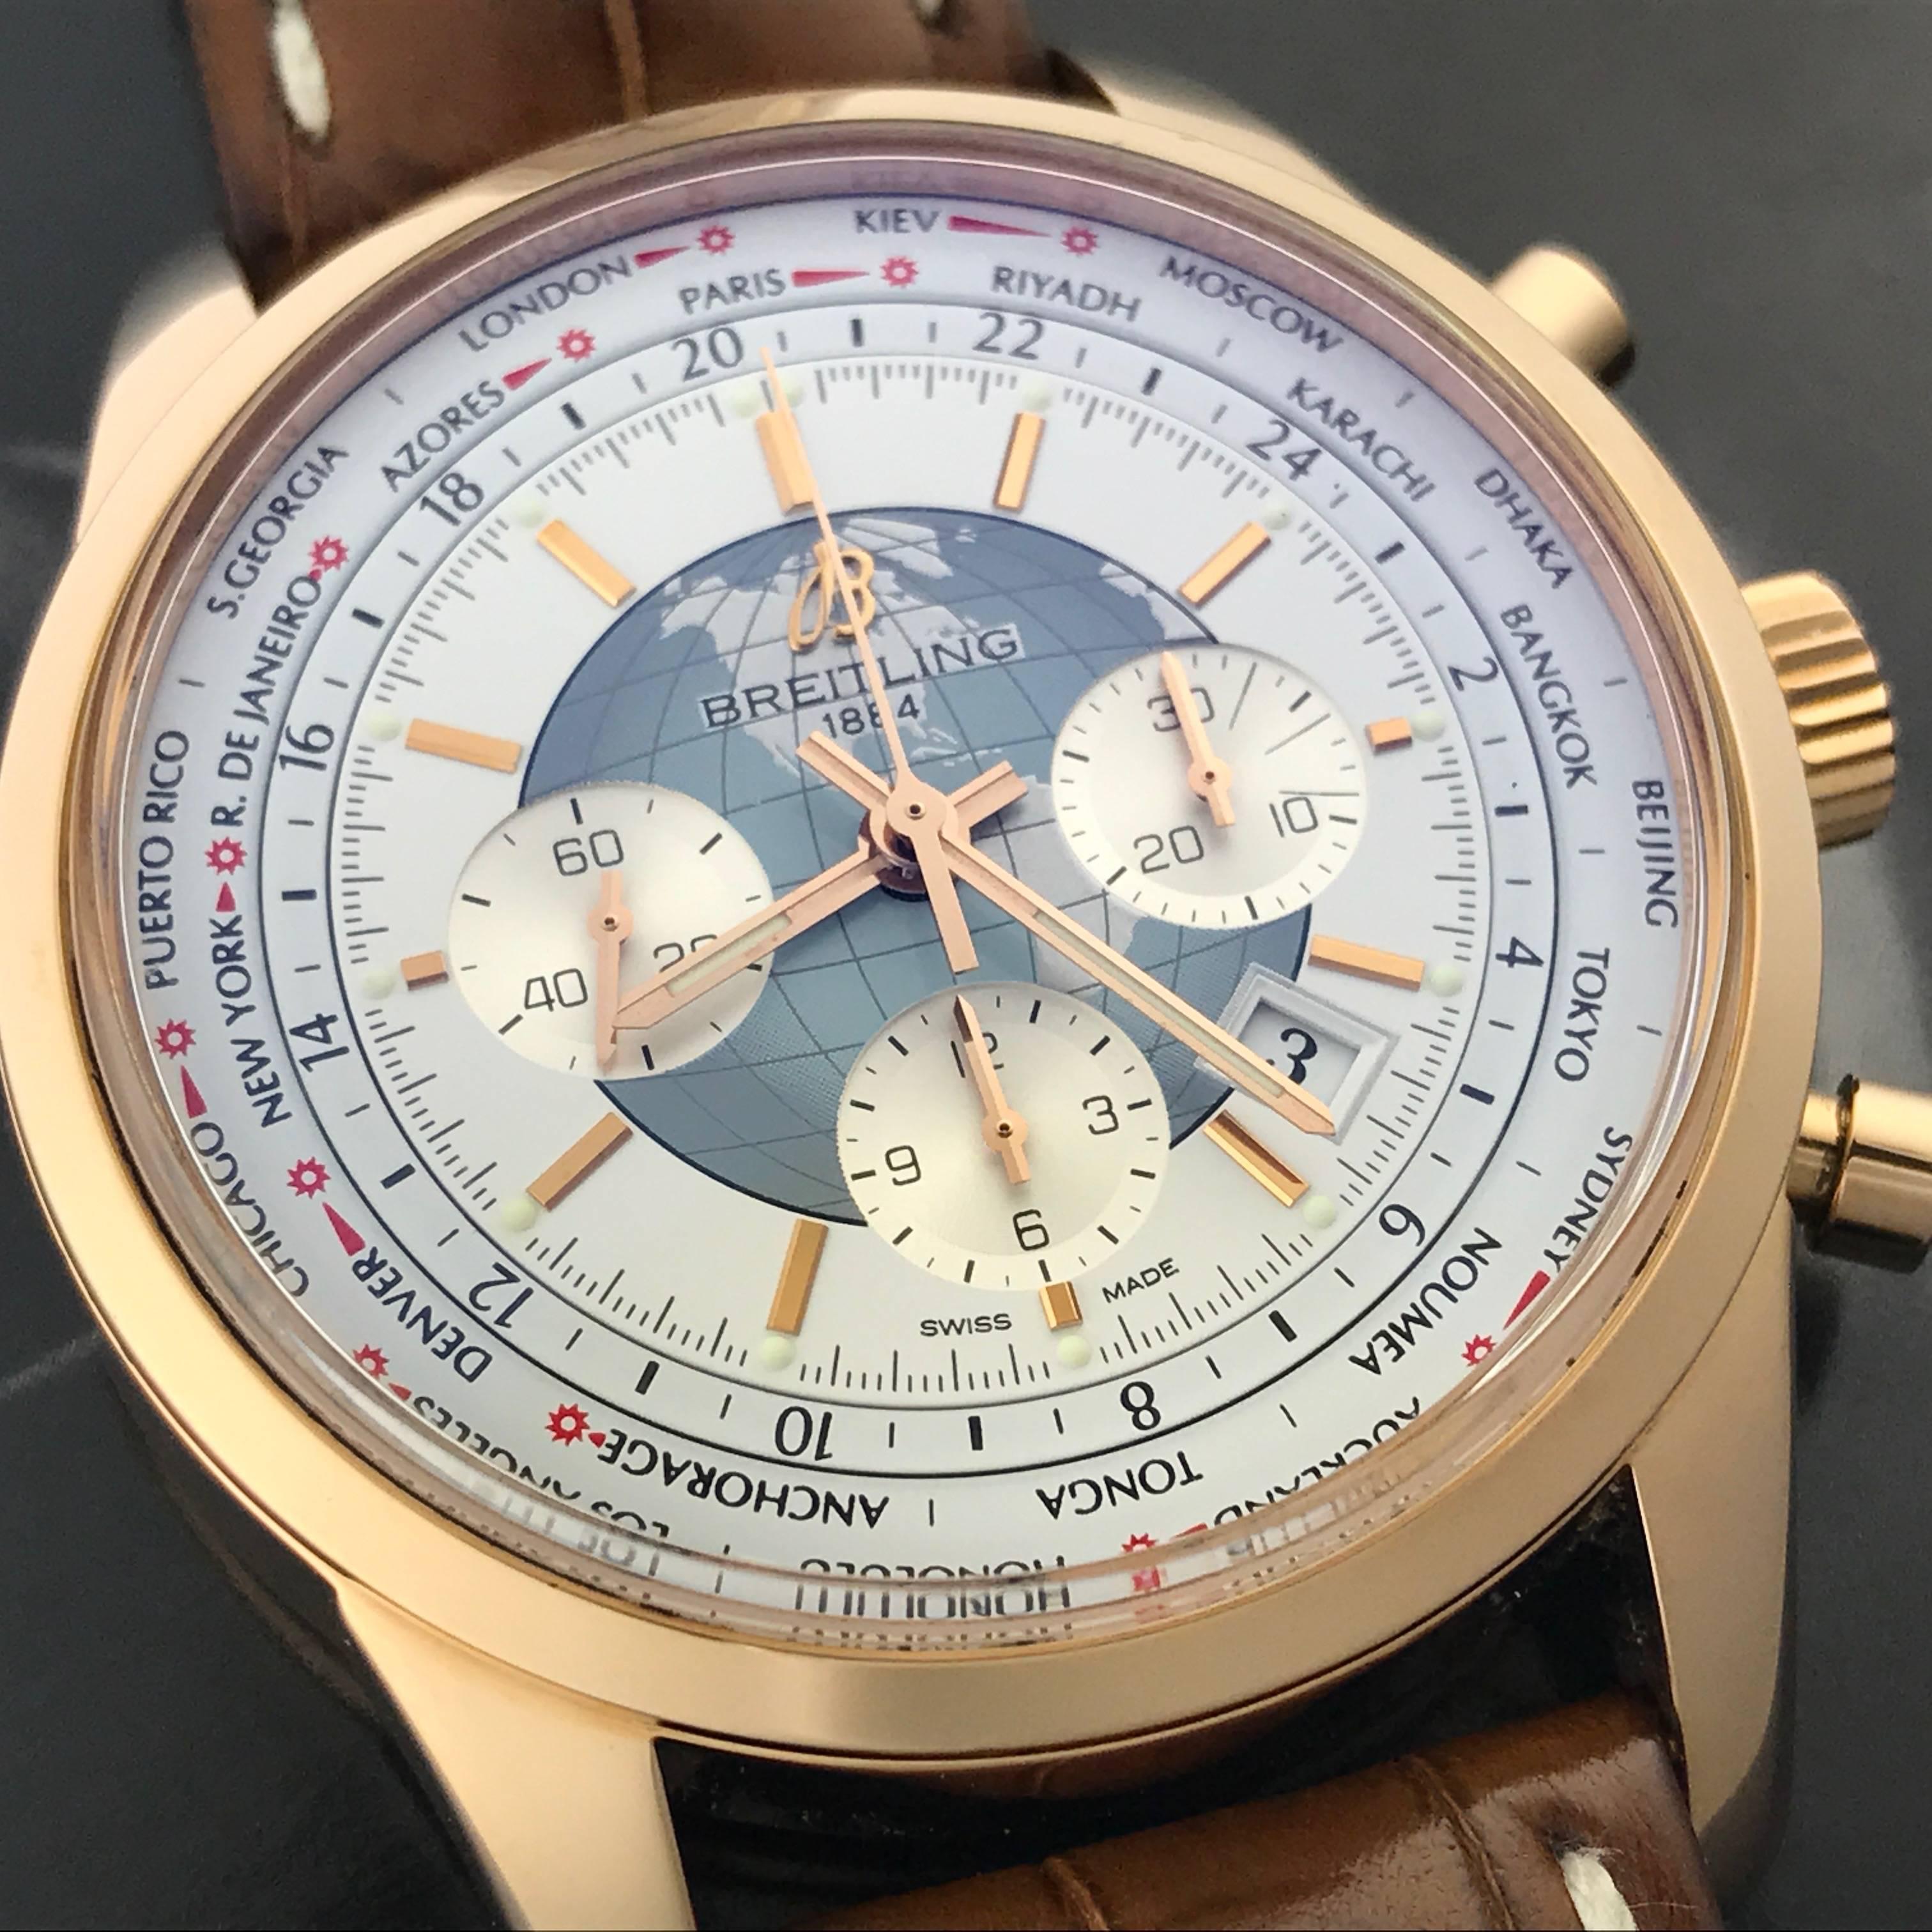 Manufacturer: Breitling
Model Name: Transocean Chronograph Unitime
Model Num: RB0510UO/A733-2CT
Condition: Pre Owned
Watch Category: Contemporary
Gender: Mens
Movement Comment: Chronograph with independent World Time setting allowing forward or